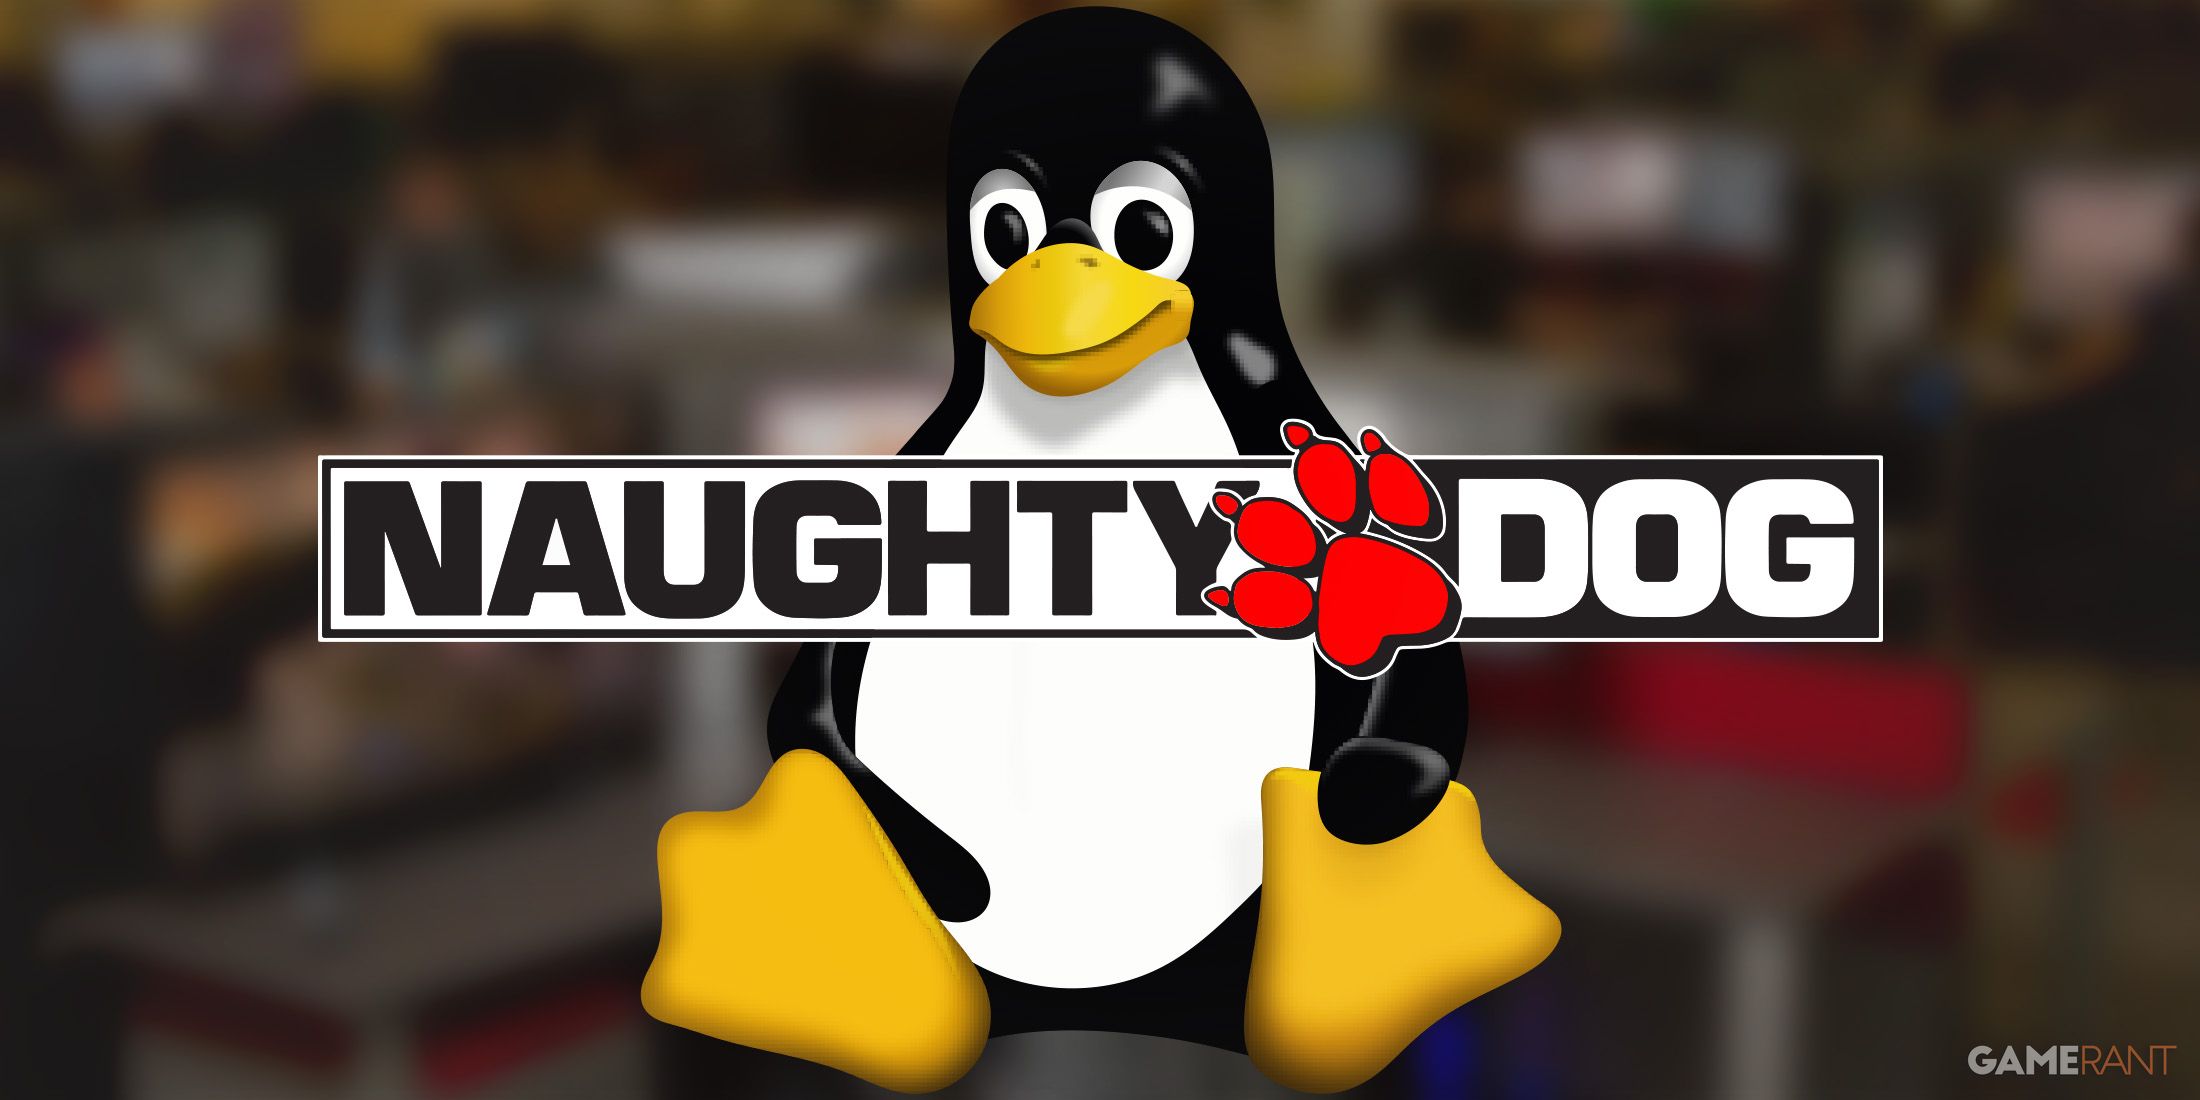 Naughty Dog logo in front of Linux Tux mascot